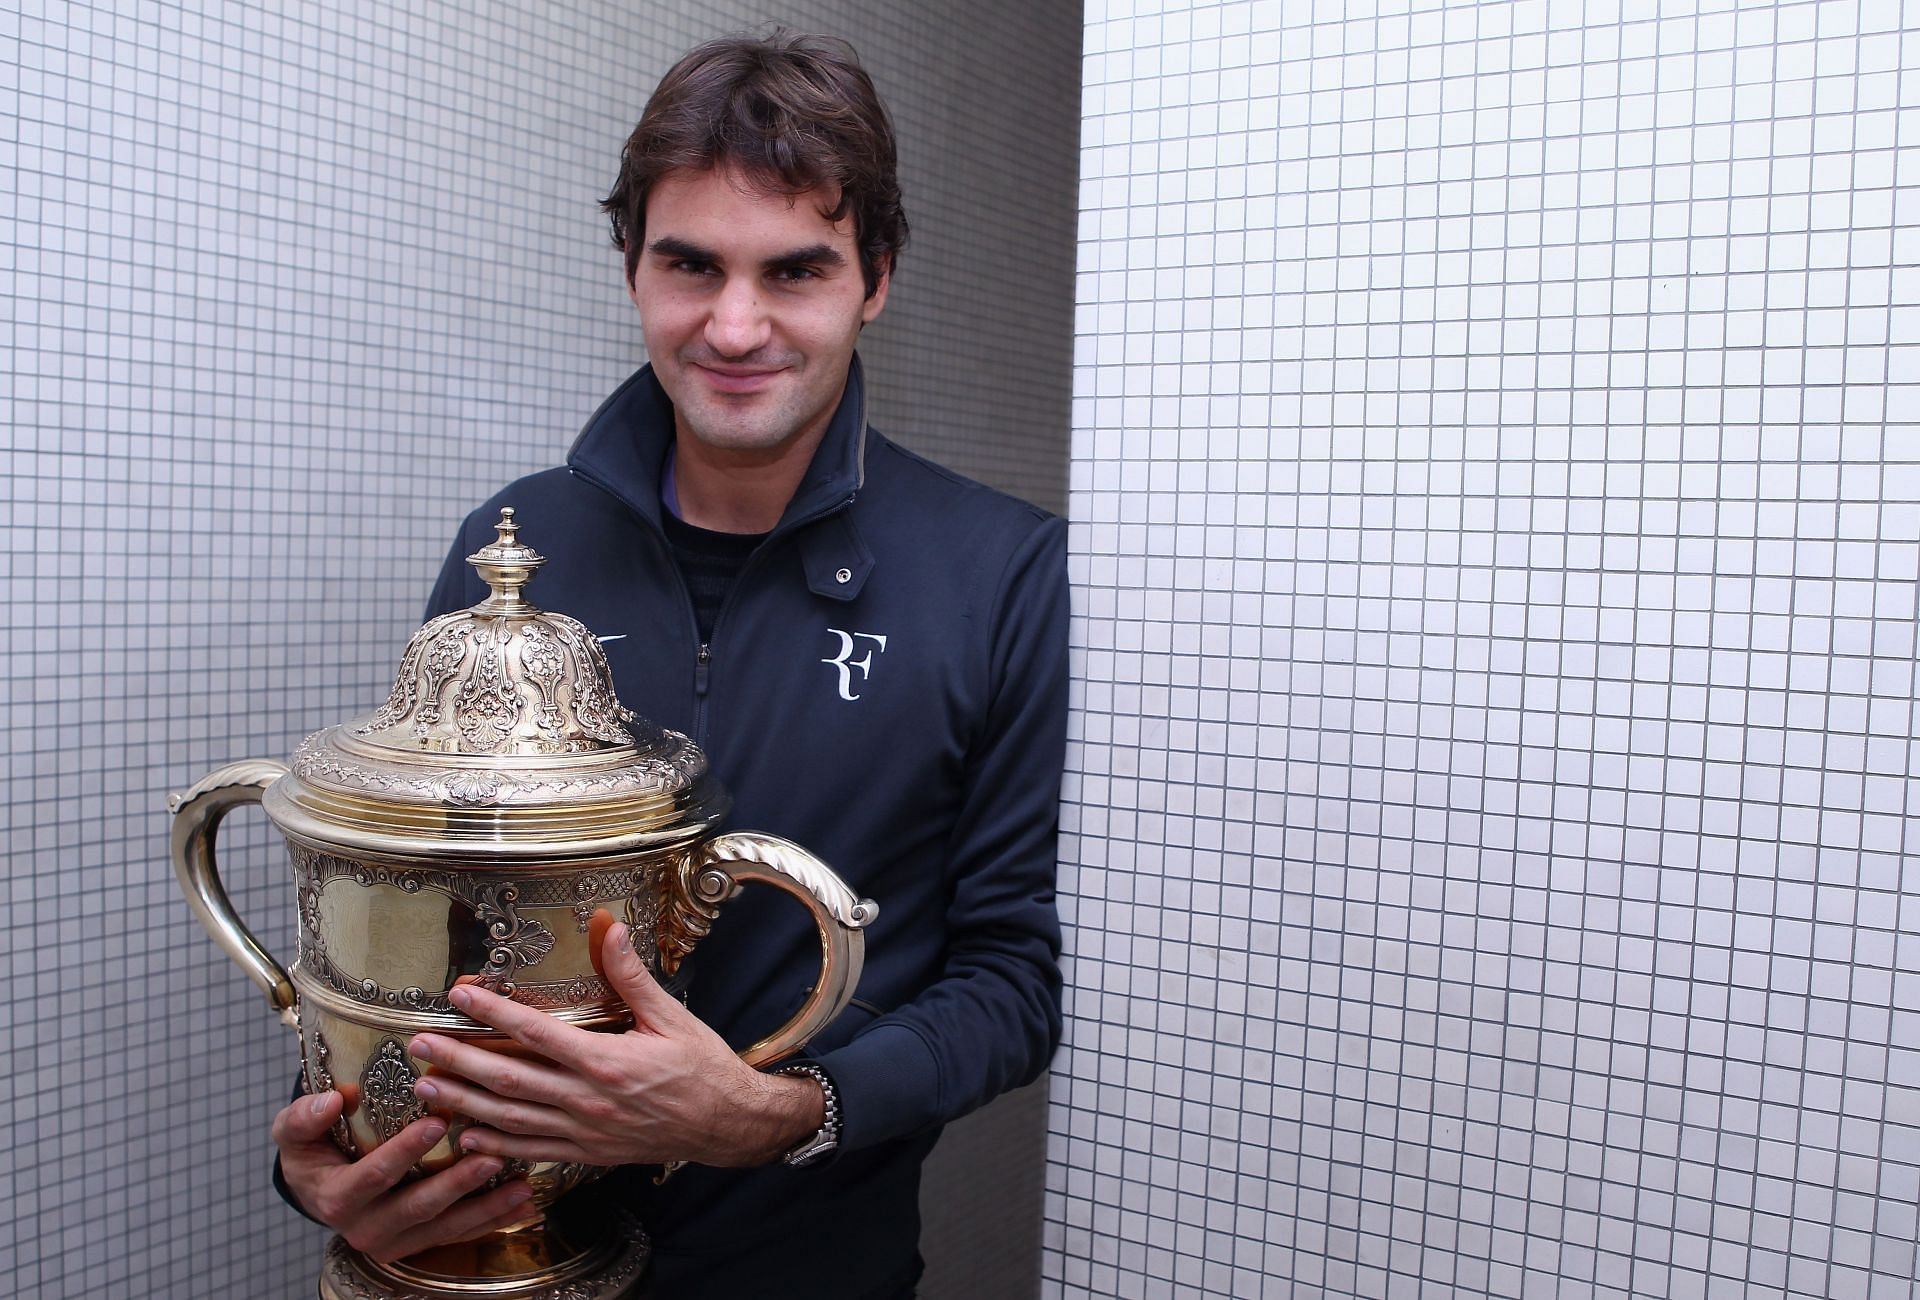 Roger Federer is a 10-time winner at the Swiss Indoors, and the three-time defending champion